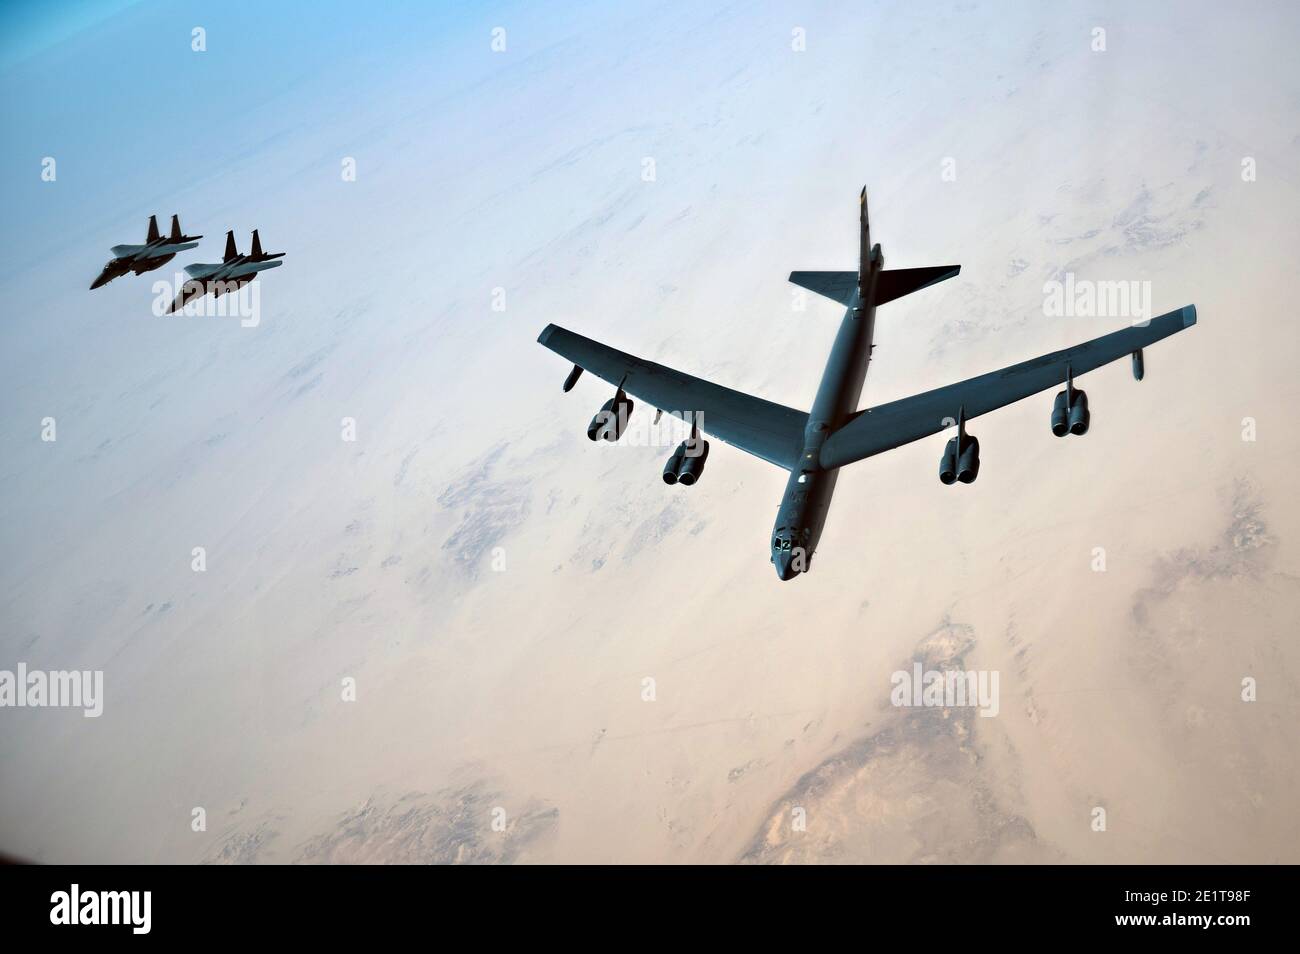 Saudi Arabia, Saudi Arabia. 07th Jan, 2021. A U.S. Air Force B-52 Stratofortress strategic bomber aircraft is escorted by Royal Saudi Arabian Air Force F-15S/A fighter aircraft as they fly over Saudi airspace January 7, 2021 in Saudi Arabia. The bomber and escort is a show of force mission as a message to Iran. Credit: Planetpix/Alamy Live News Stock Photo